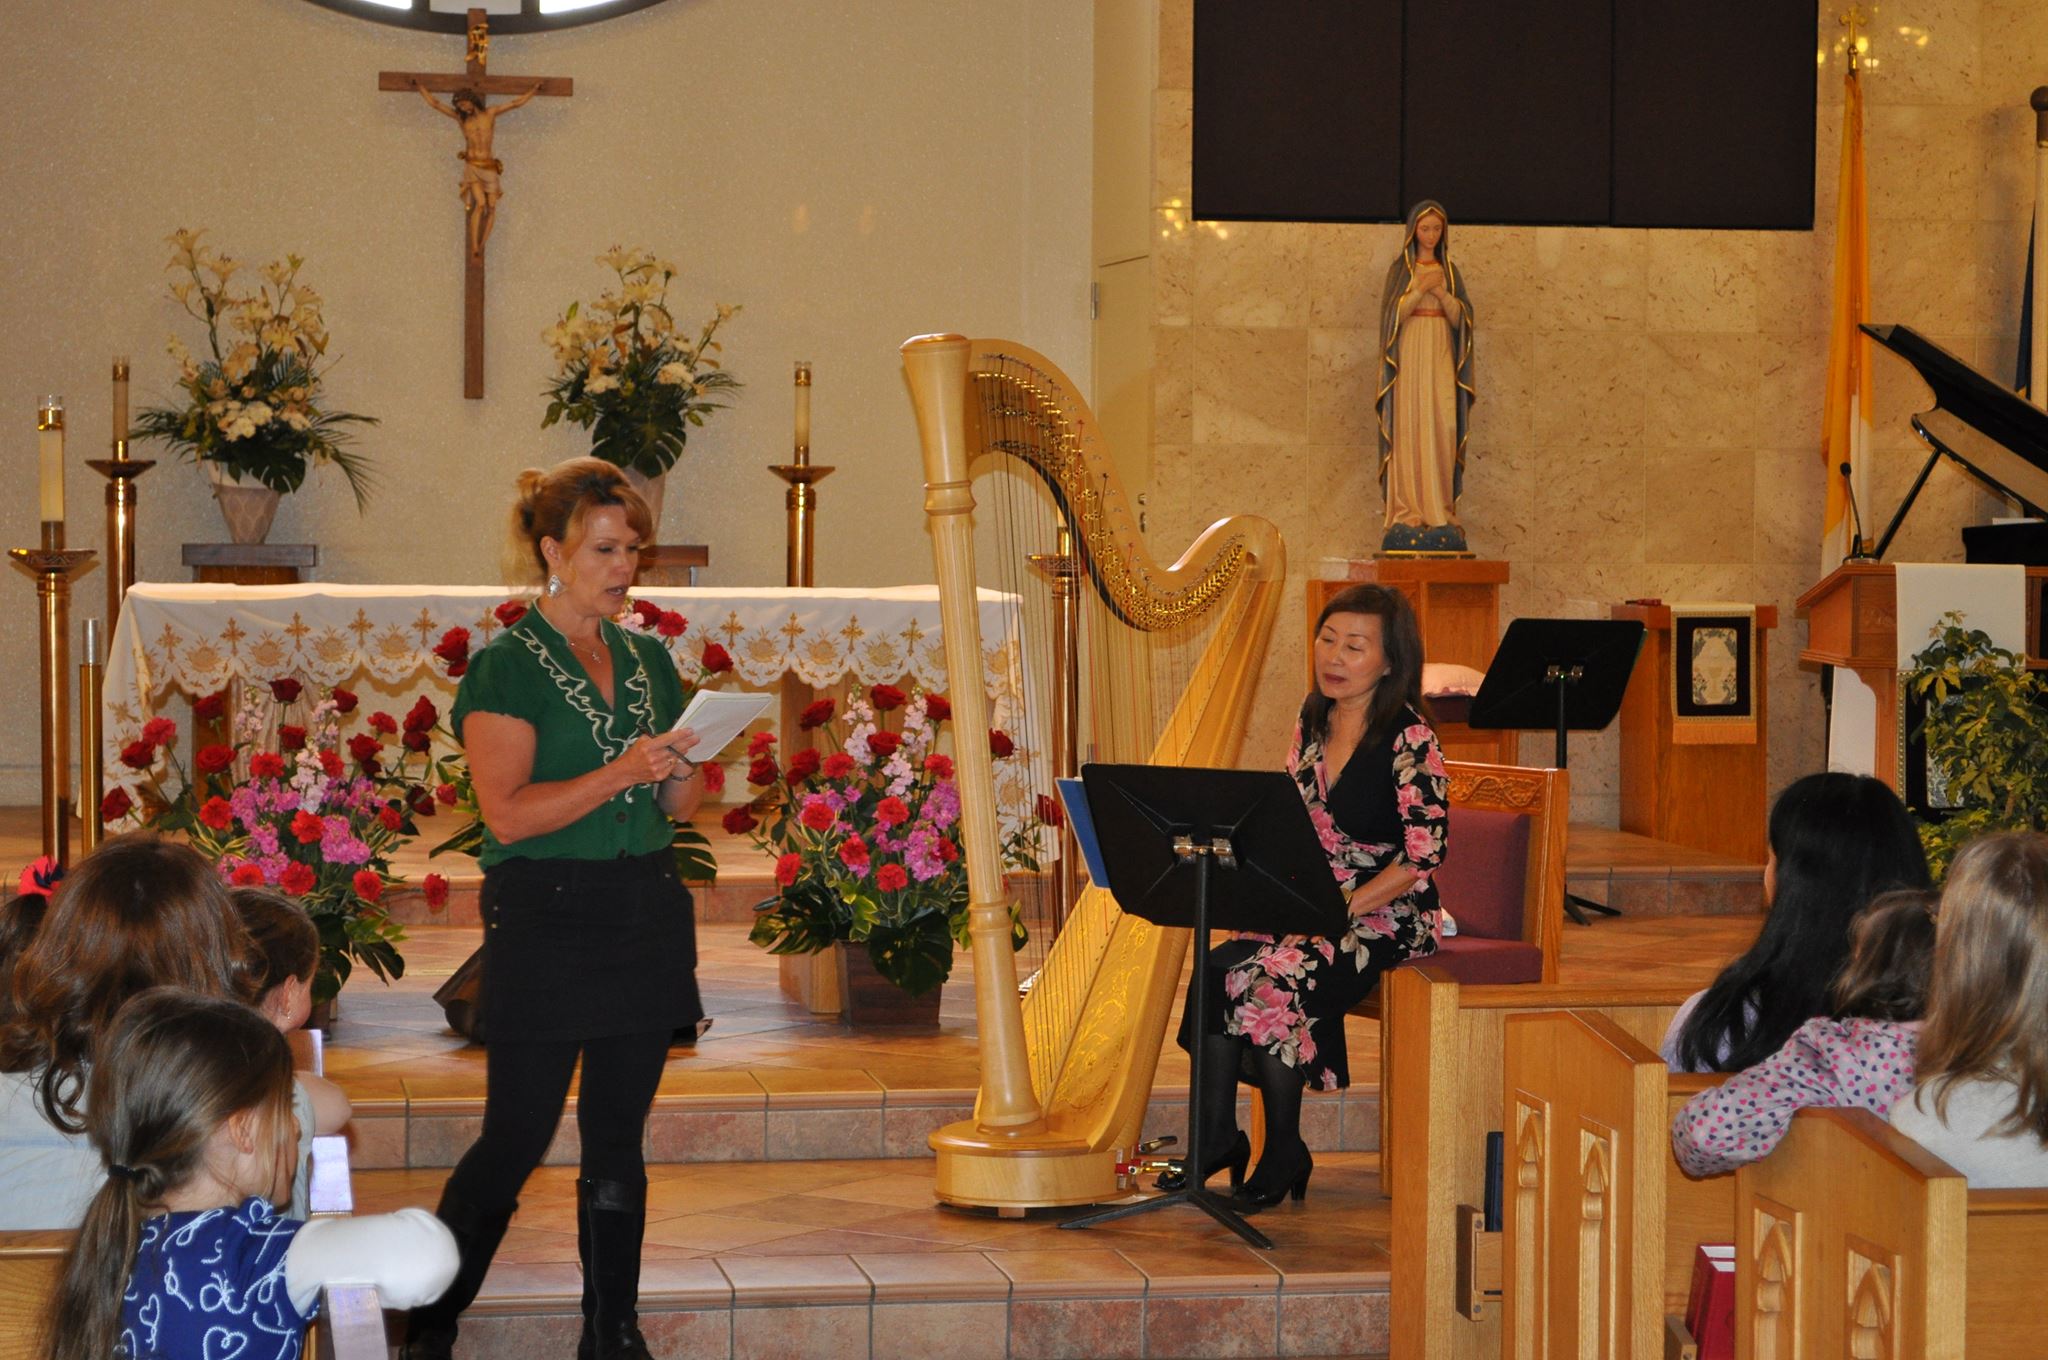  ecture Recital for American-Japanese Homeschoolers for their music class at the Chapel of Hope Church. 